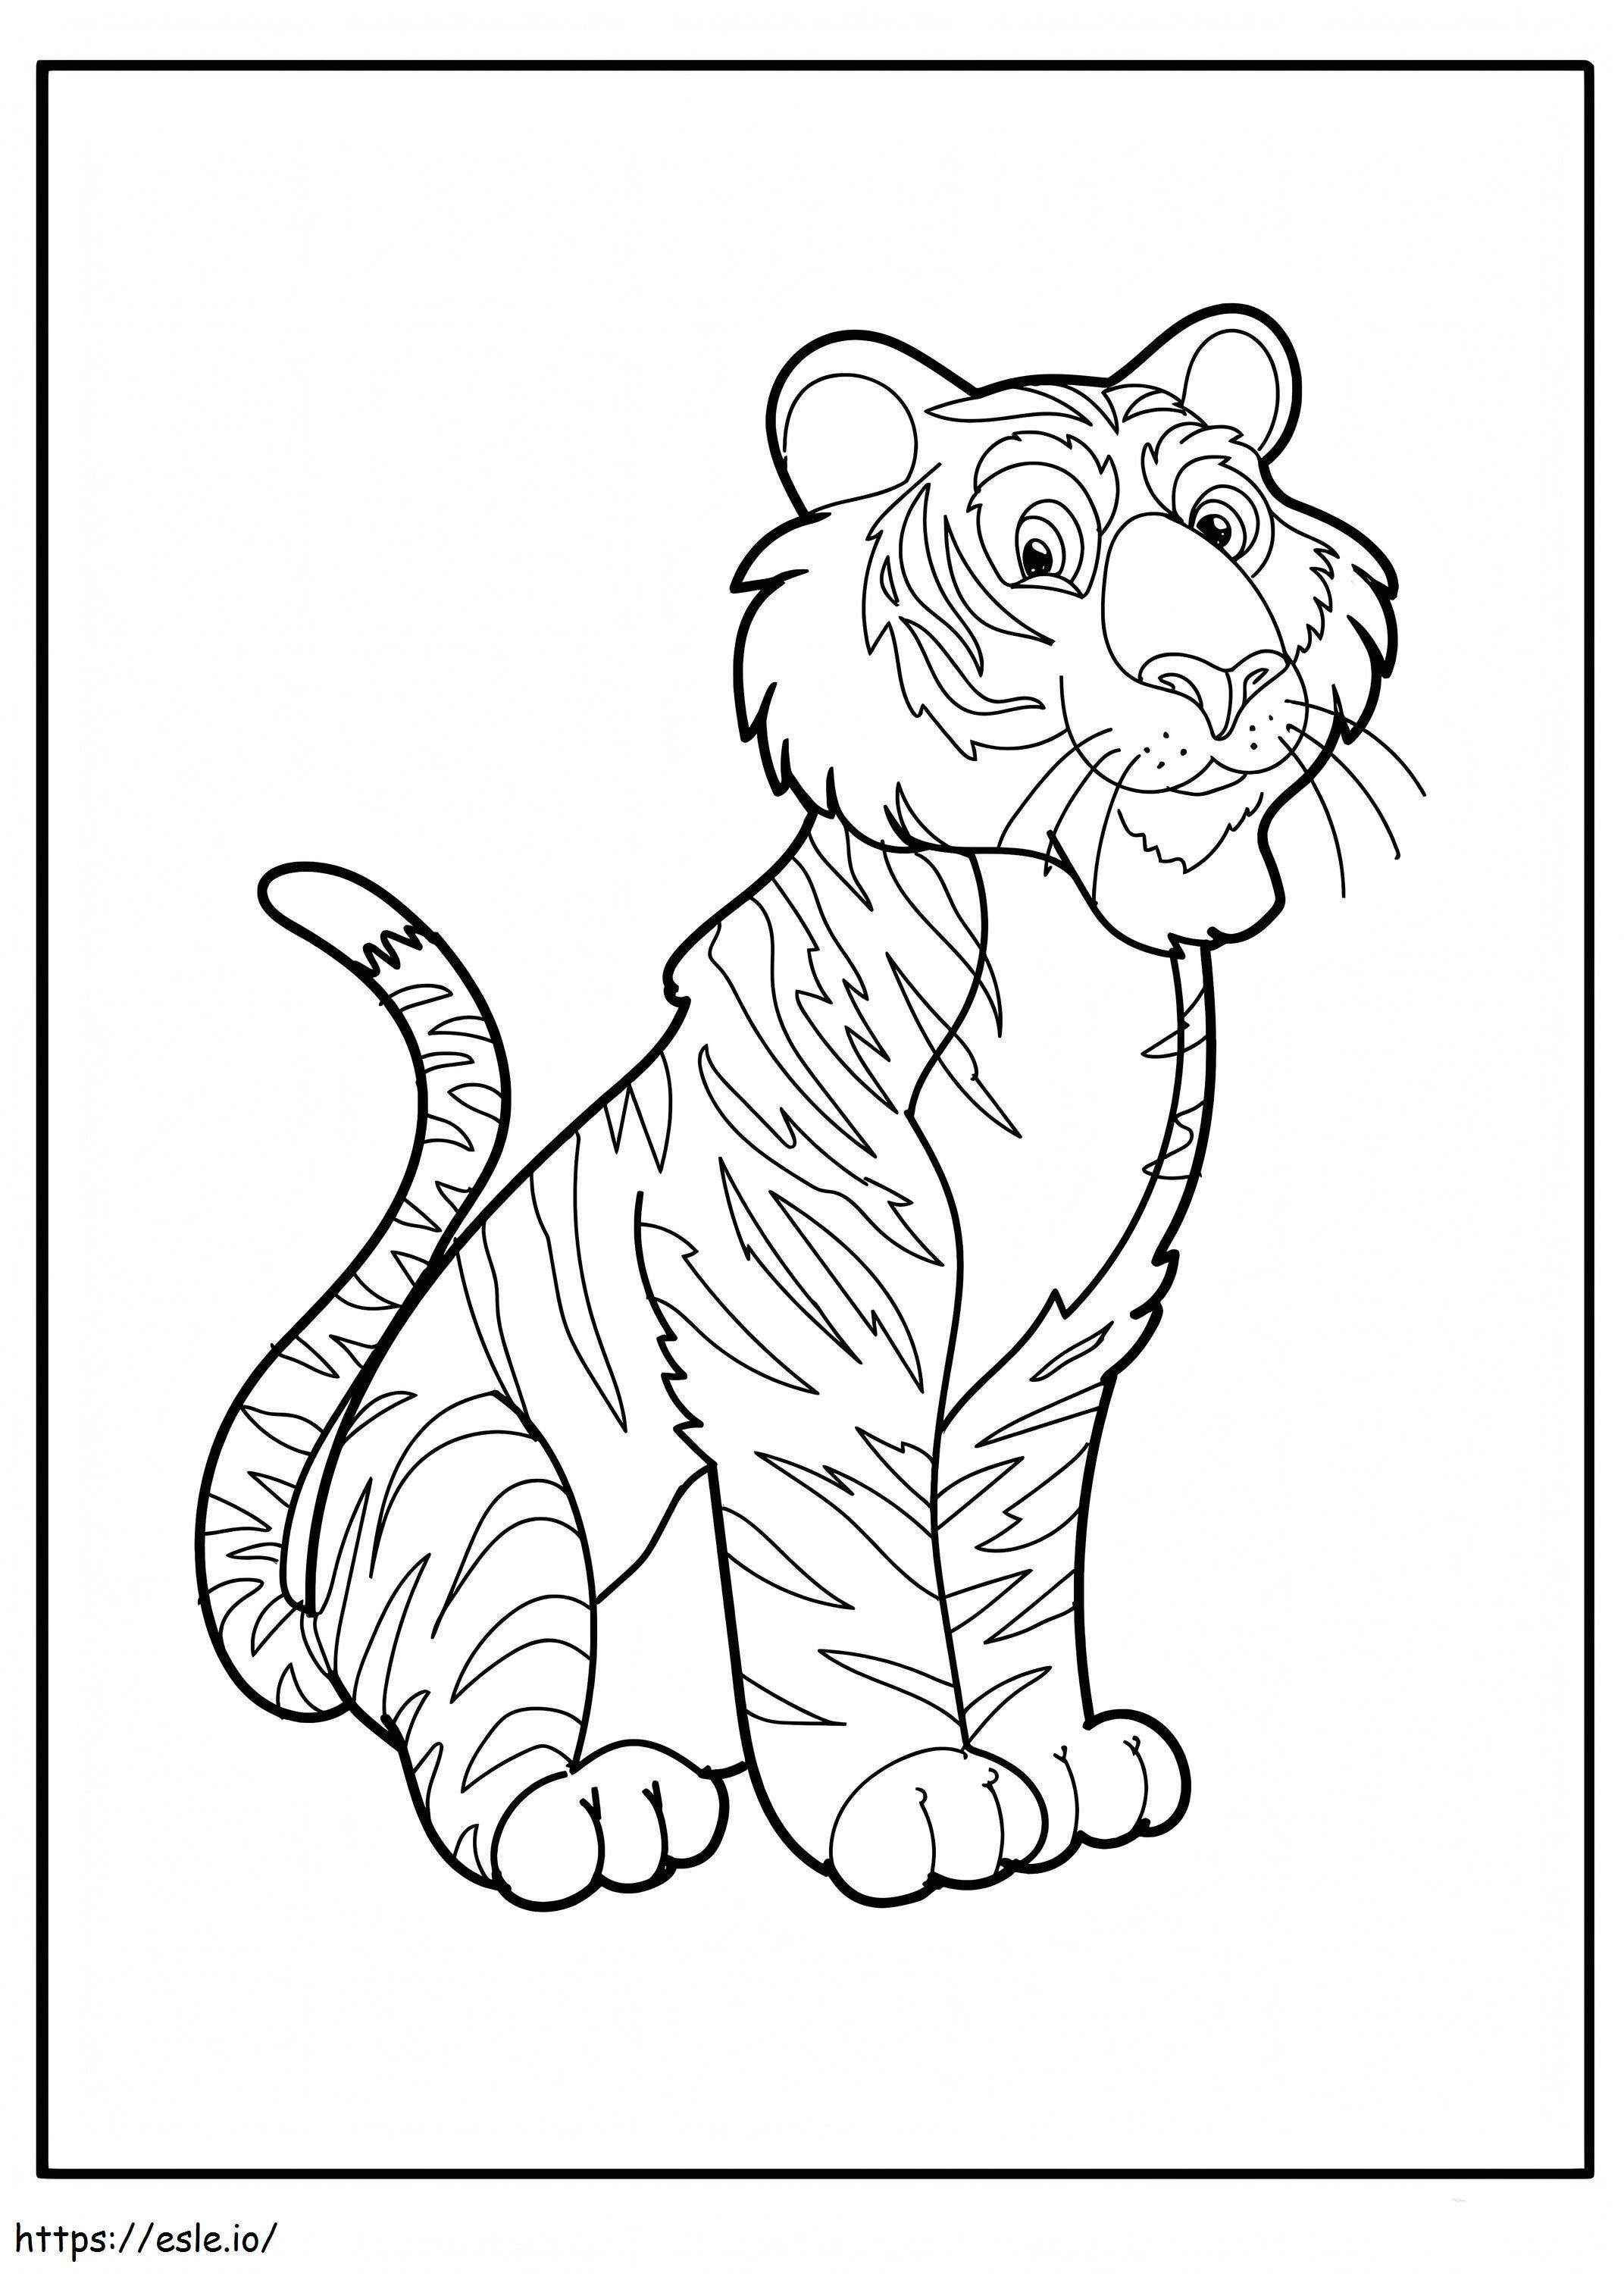 Smiling Tiger Sitting coloring page